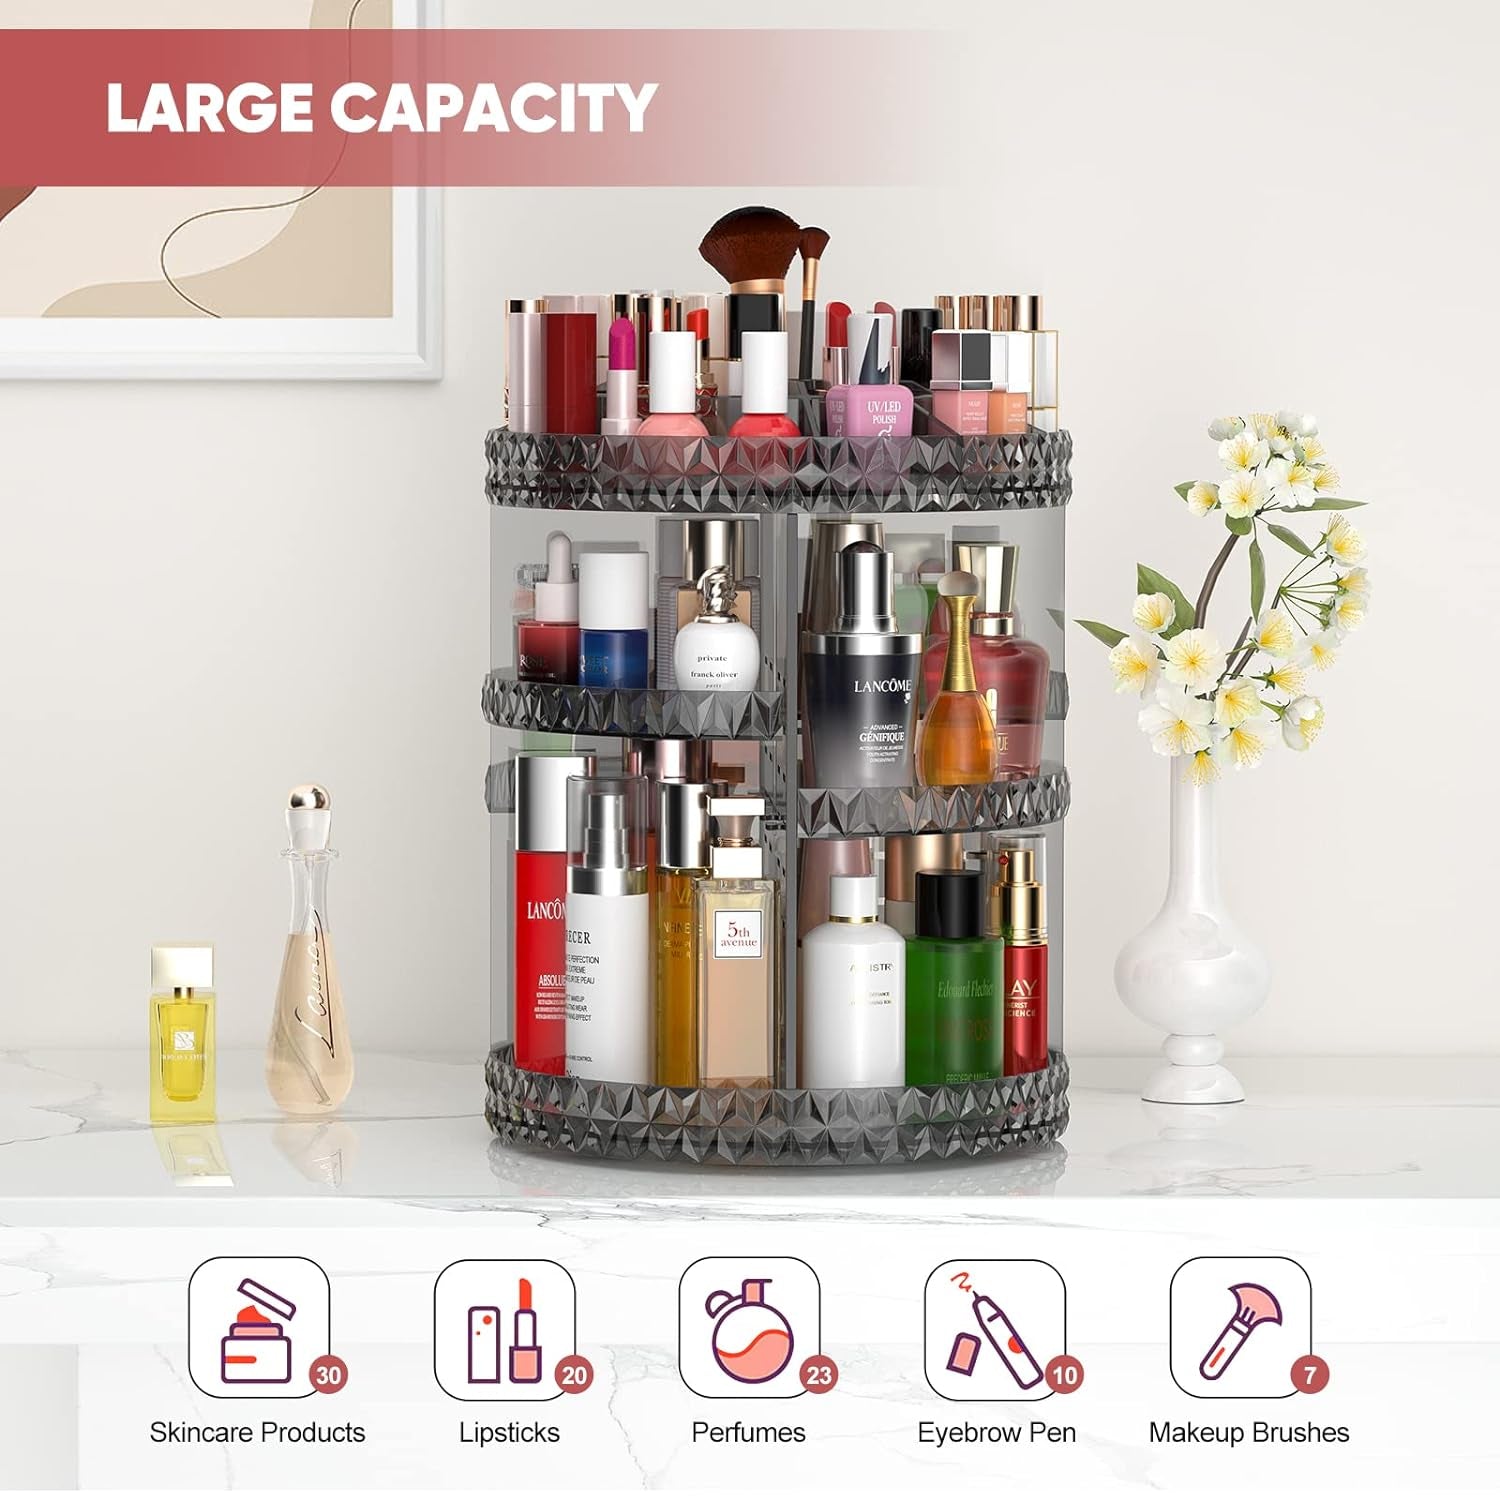 A Glimpse of the Future: Stay tuned for the imminent release of our Brand New 360 Makeup Rotating Organizer. This innovative marvel provides expanded storage options and comprehensive features, poised to revolutionize your cosmetic organization. Keep an eye out for the latest innovations from Trinket Trends.